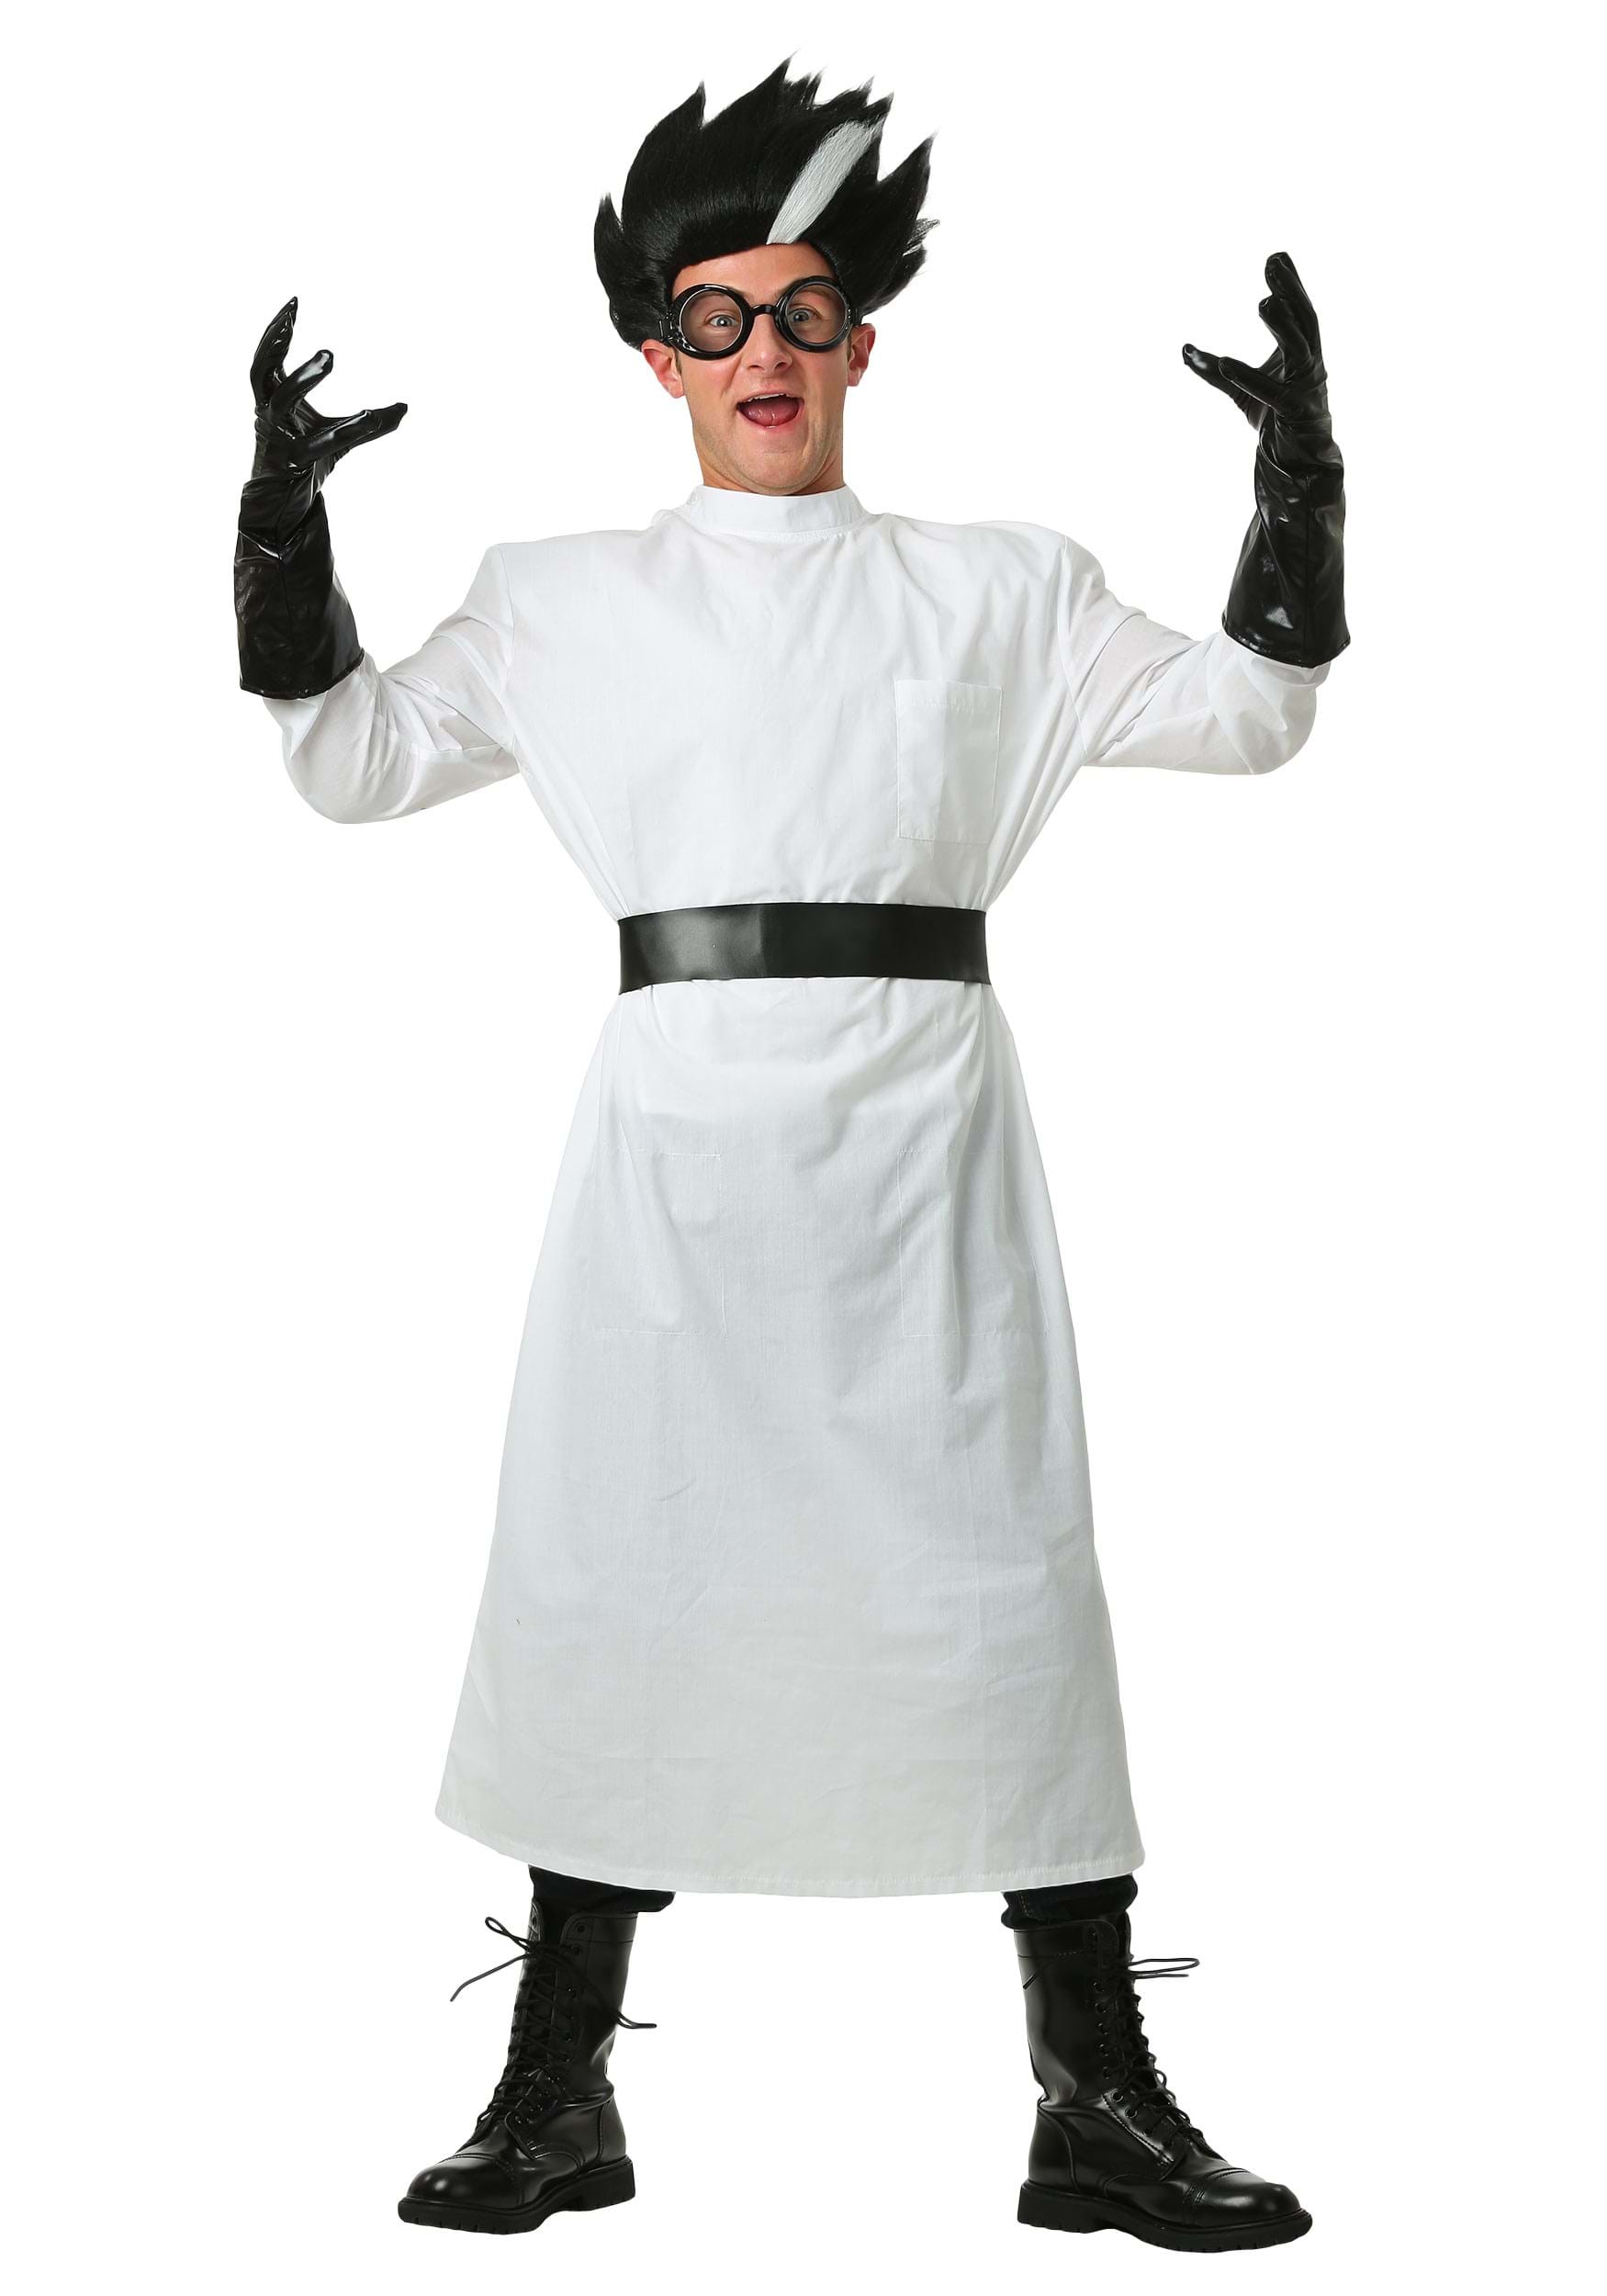 Photos - Fancy Dress Deluxe FUN Costumes Adult Plus Size  Mad Scientist Costume | Plus Size Cost 